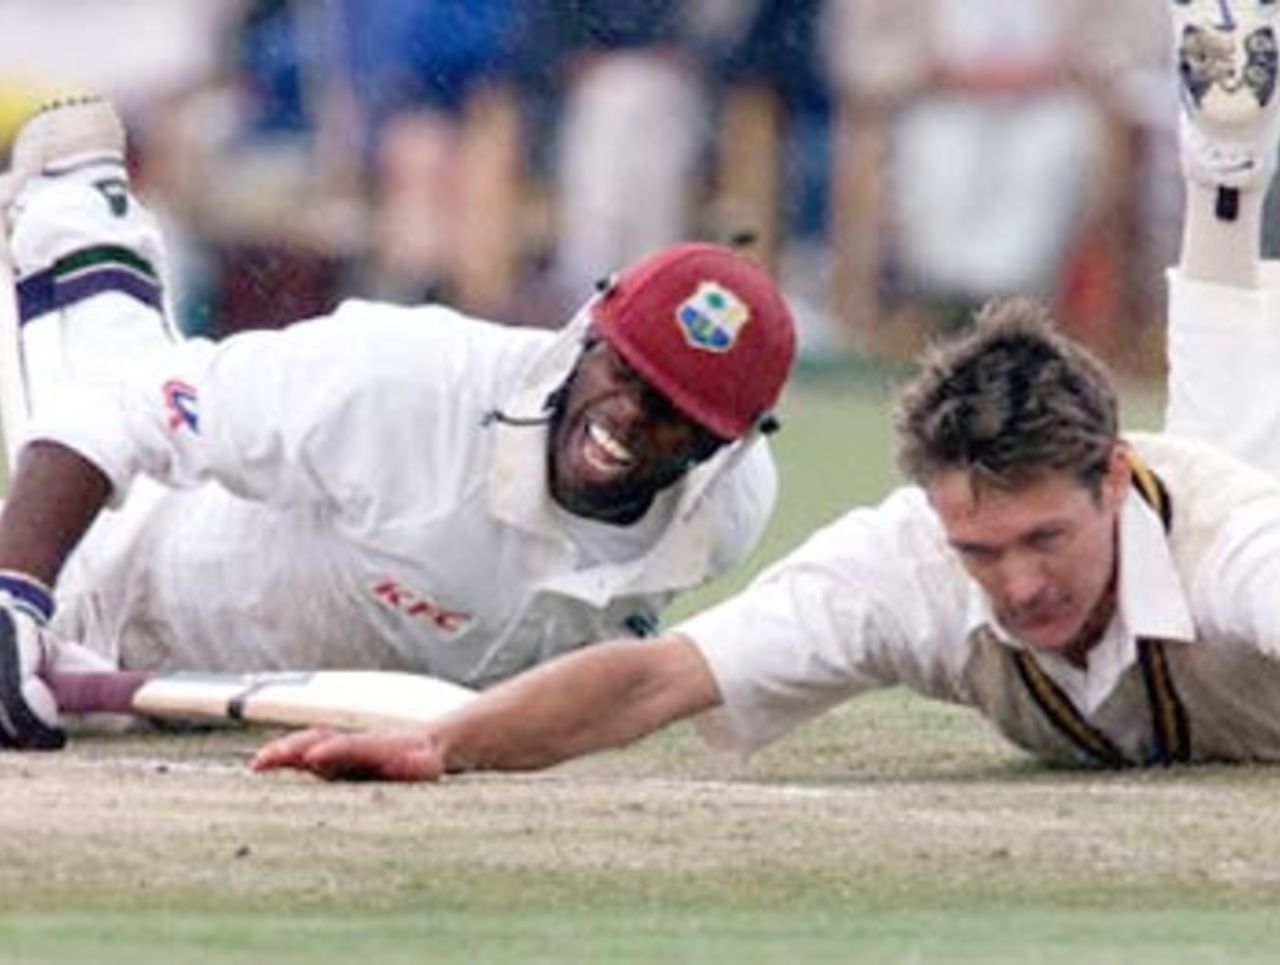 Sherwin Campbell of the West Indies (L) dives to make his ground, as bowler Stuart Karppinen attempts a run-out during an exhibition match at Lilac Hill near Perth, 07 November 2000. The match is being played between the West Indies test side and the Australian Cricket Board Chairman's X1 and is the touring sides first official fixture. Campbell, the vice-captain of the West Indies is currently on 61runs.